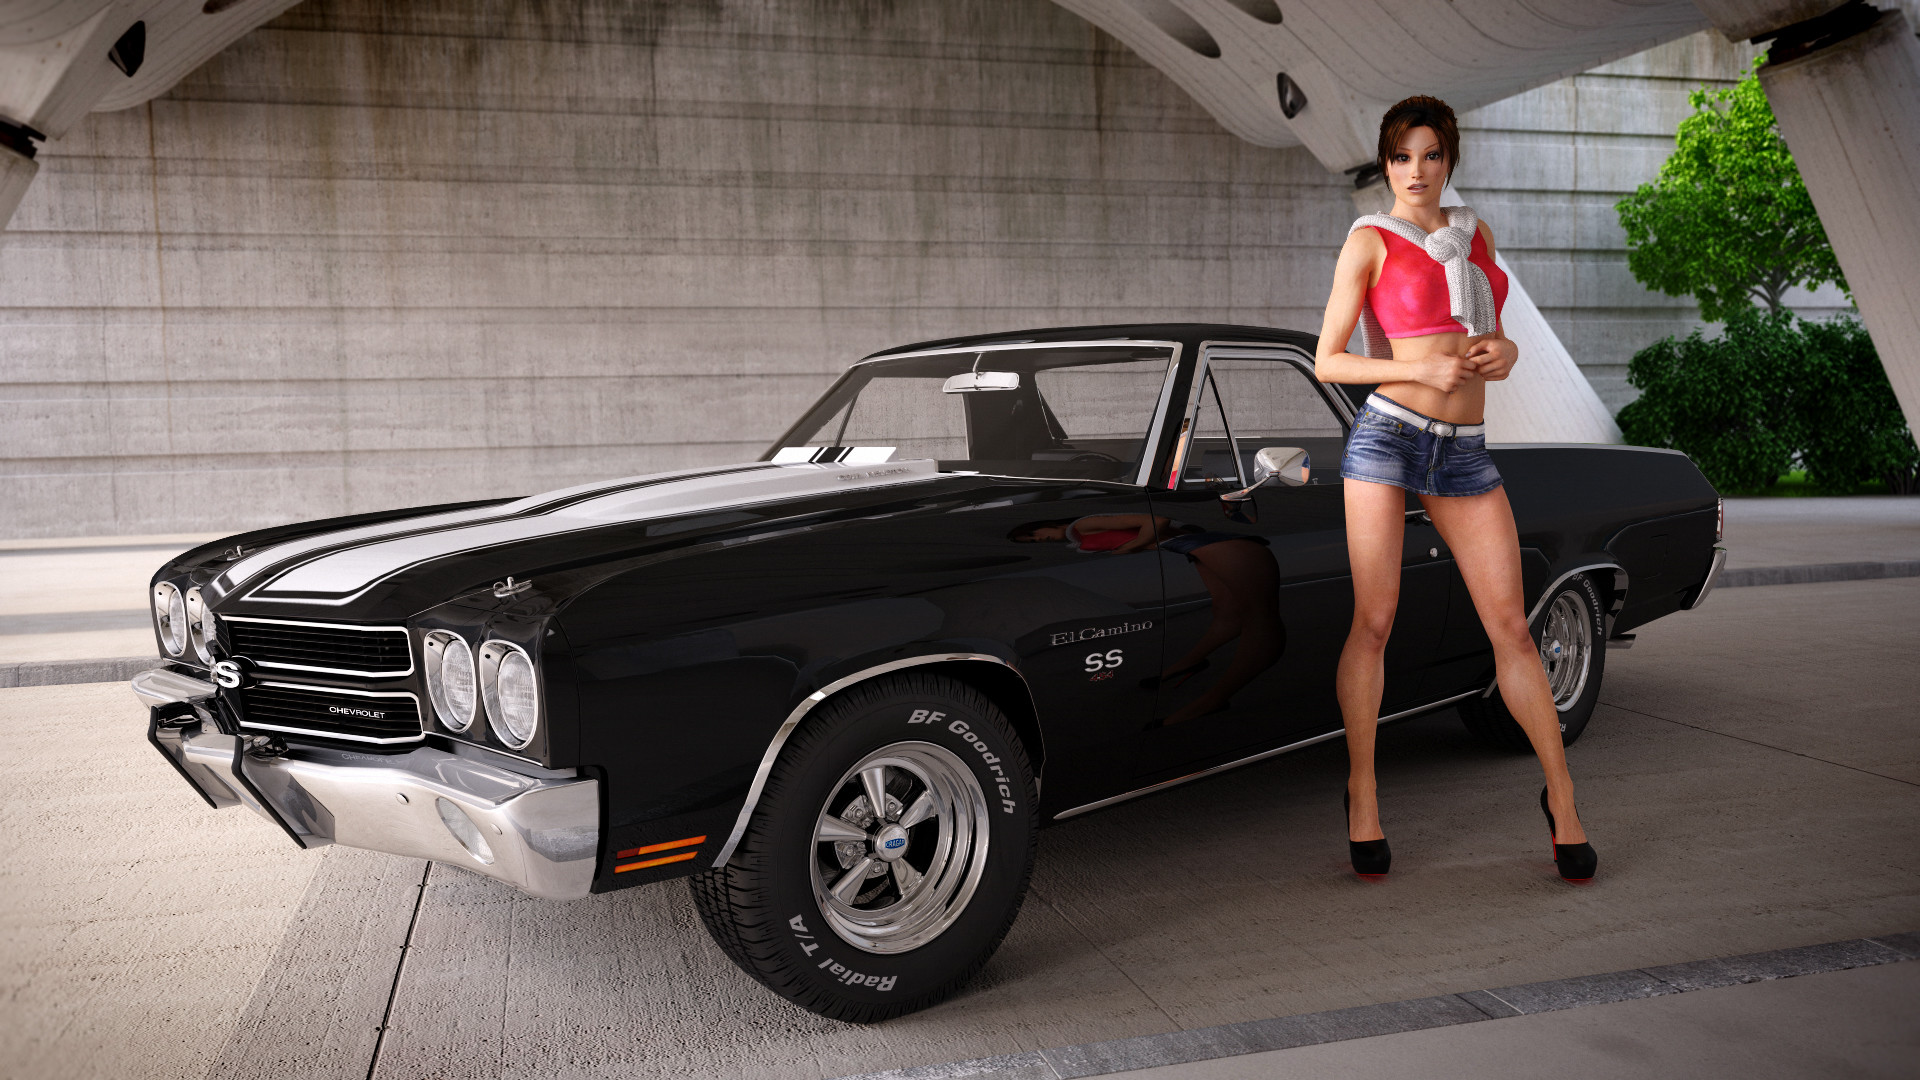 1920x1080 Coupe Pin Up El Camino Pin Up By Jerry001 On Deviantart